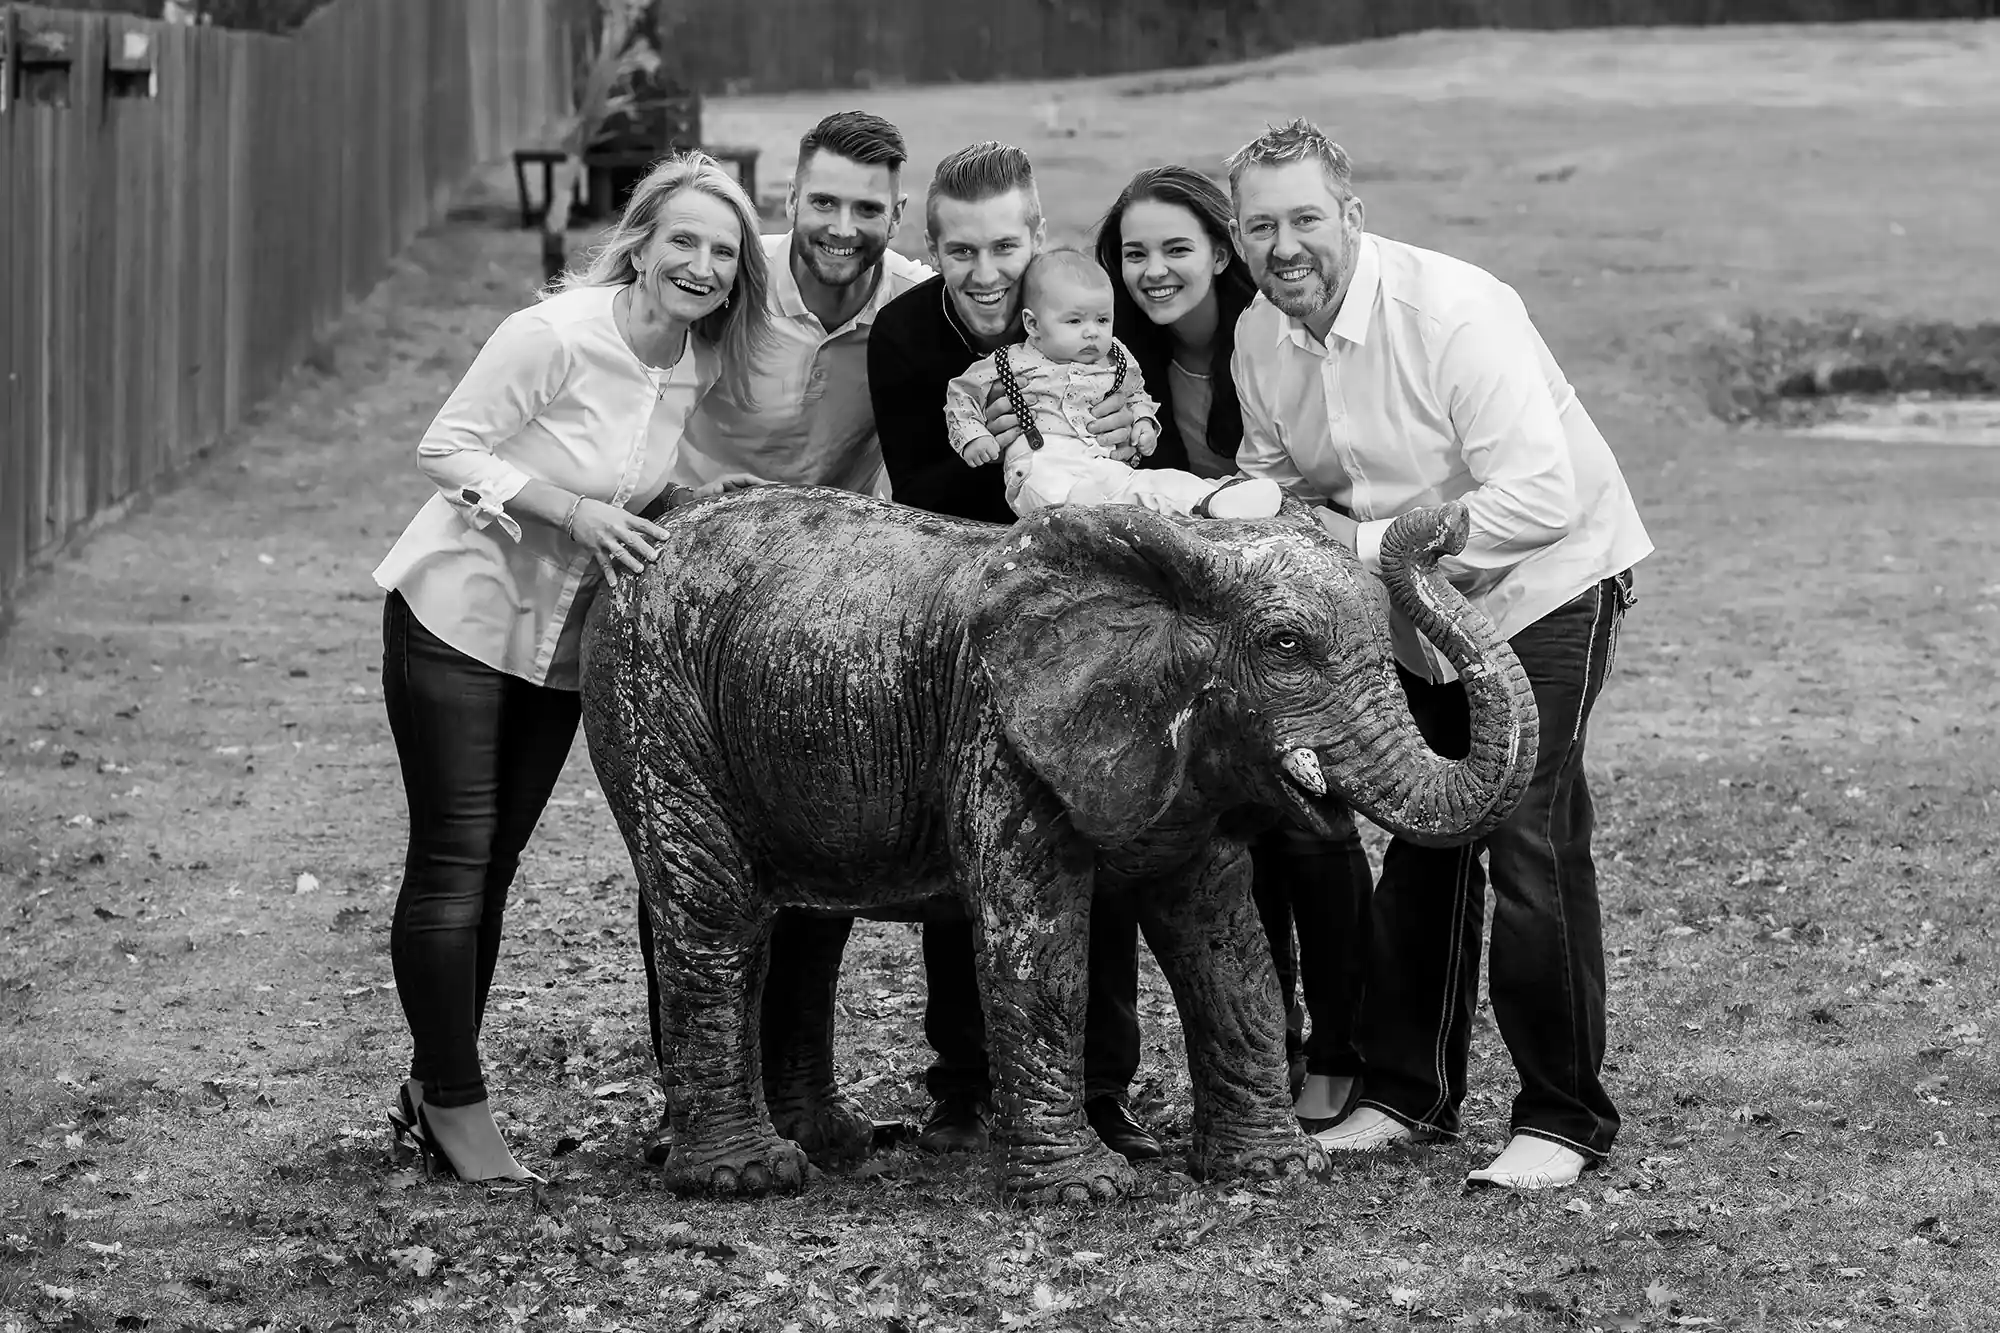 Black and white photo of five adults and a baby posing with a baby elephant outdoors. Everyone is smiling and standing close together.